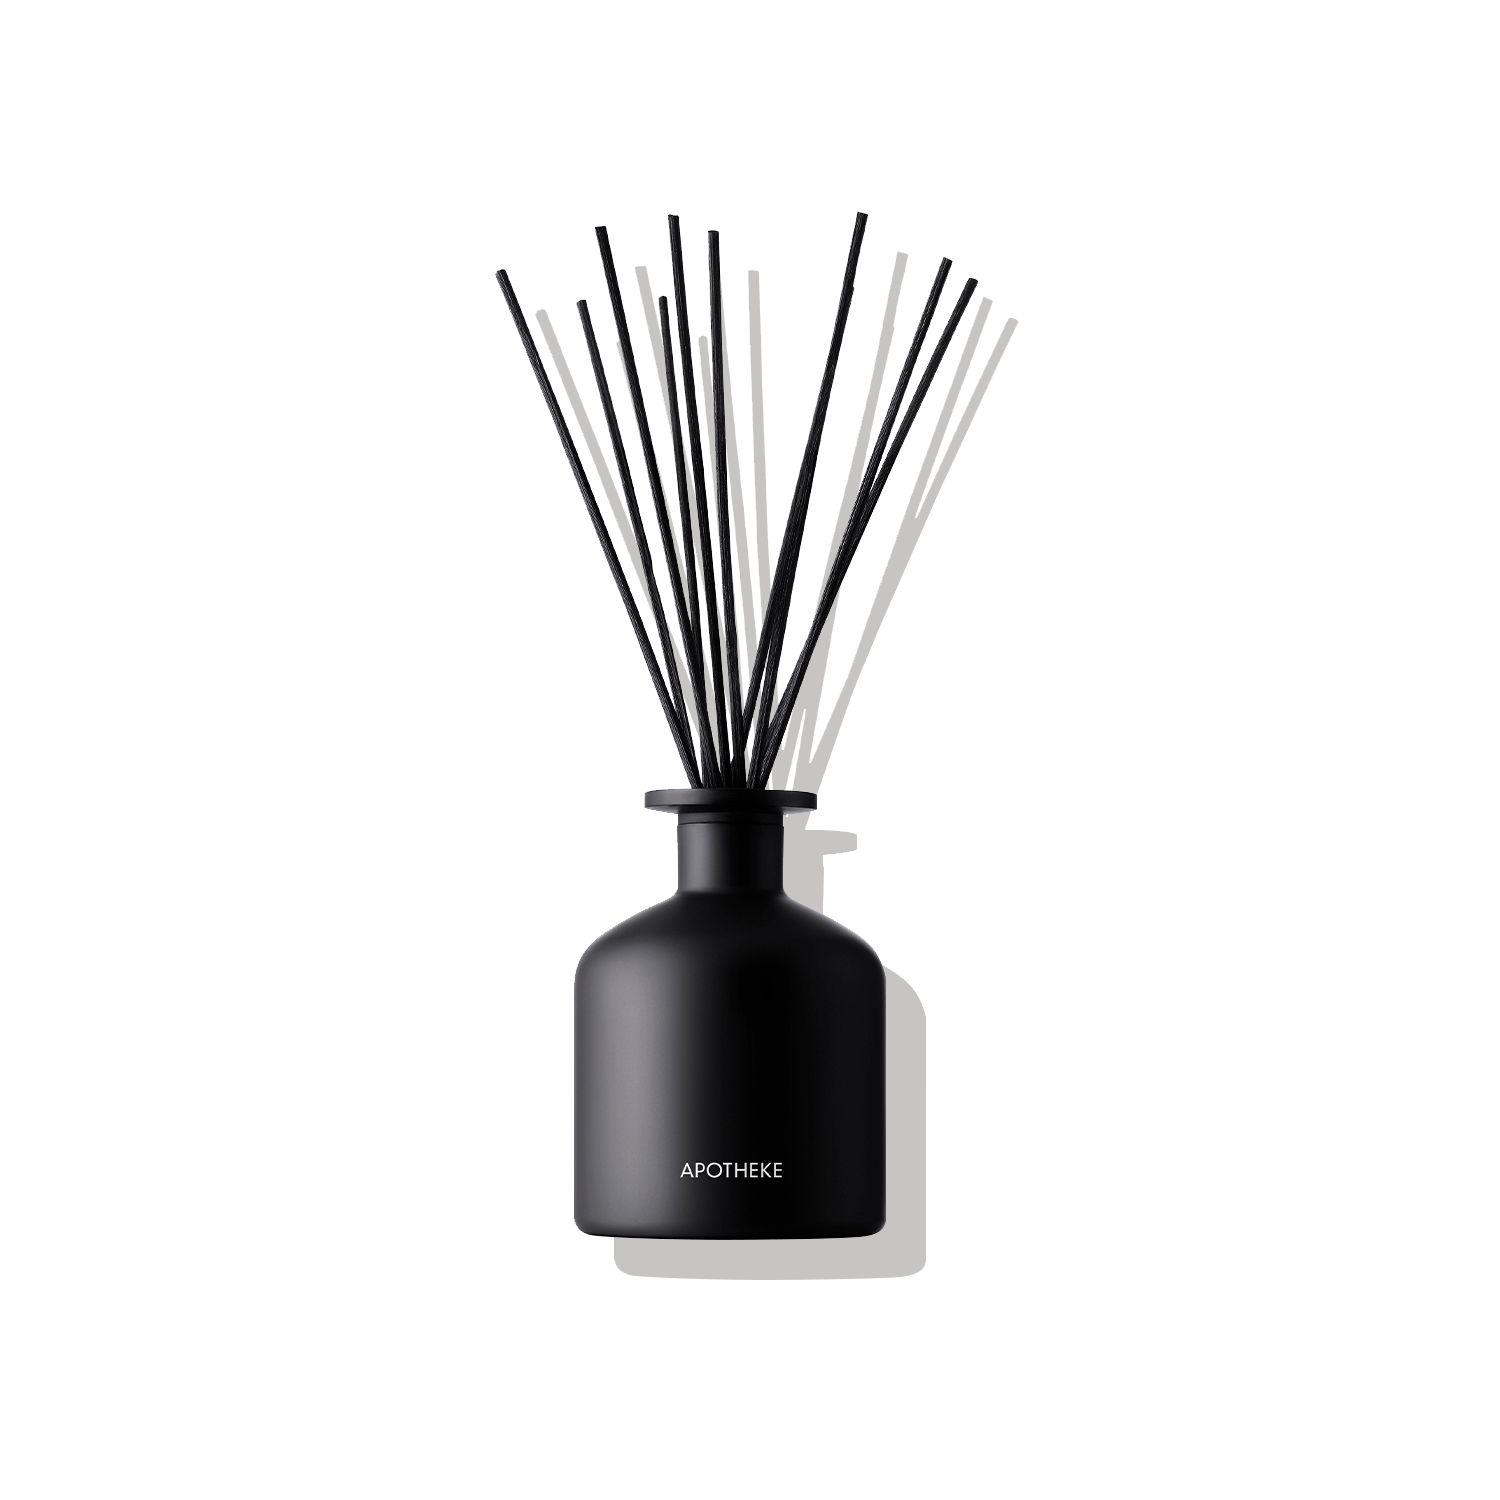 Apotheke Charcoal Reed Diffuser for $48.00 | Scentbird